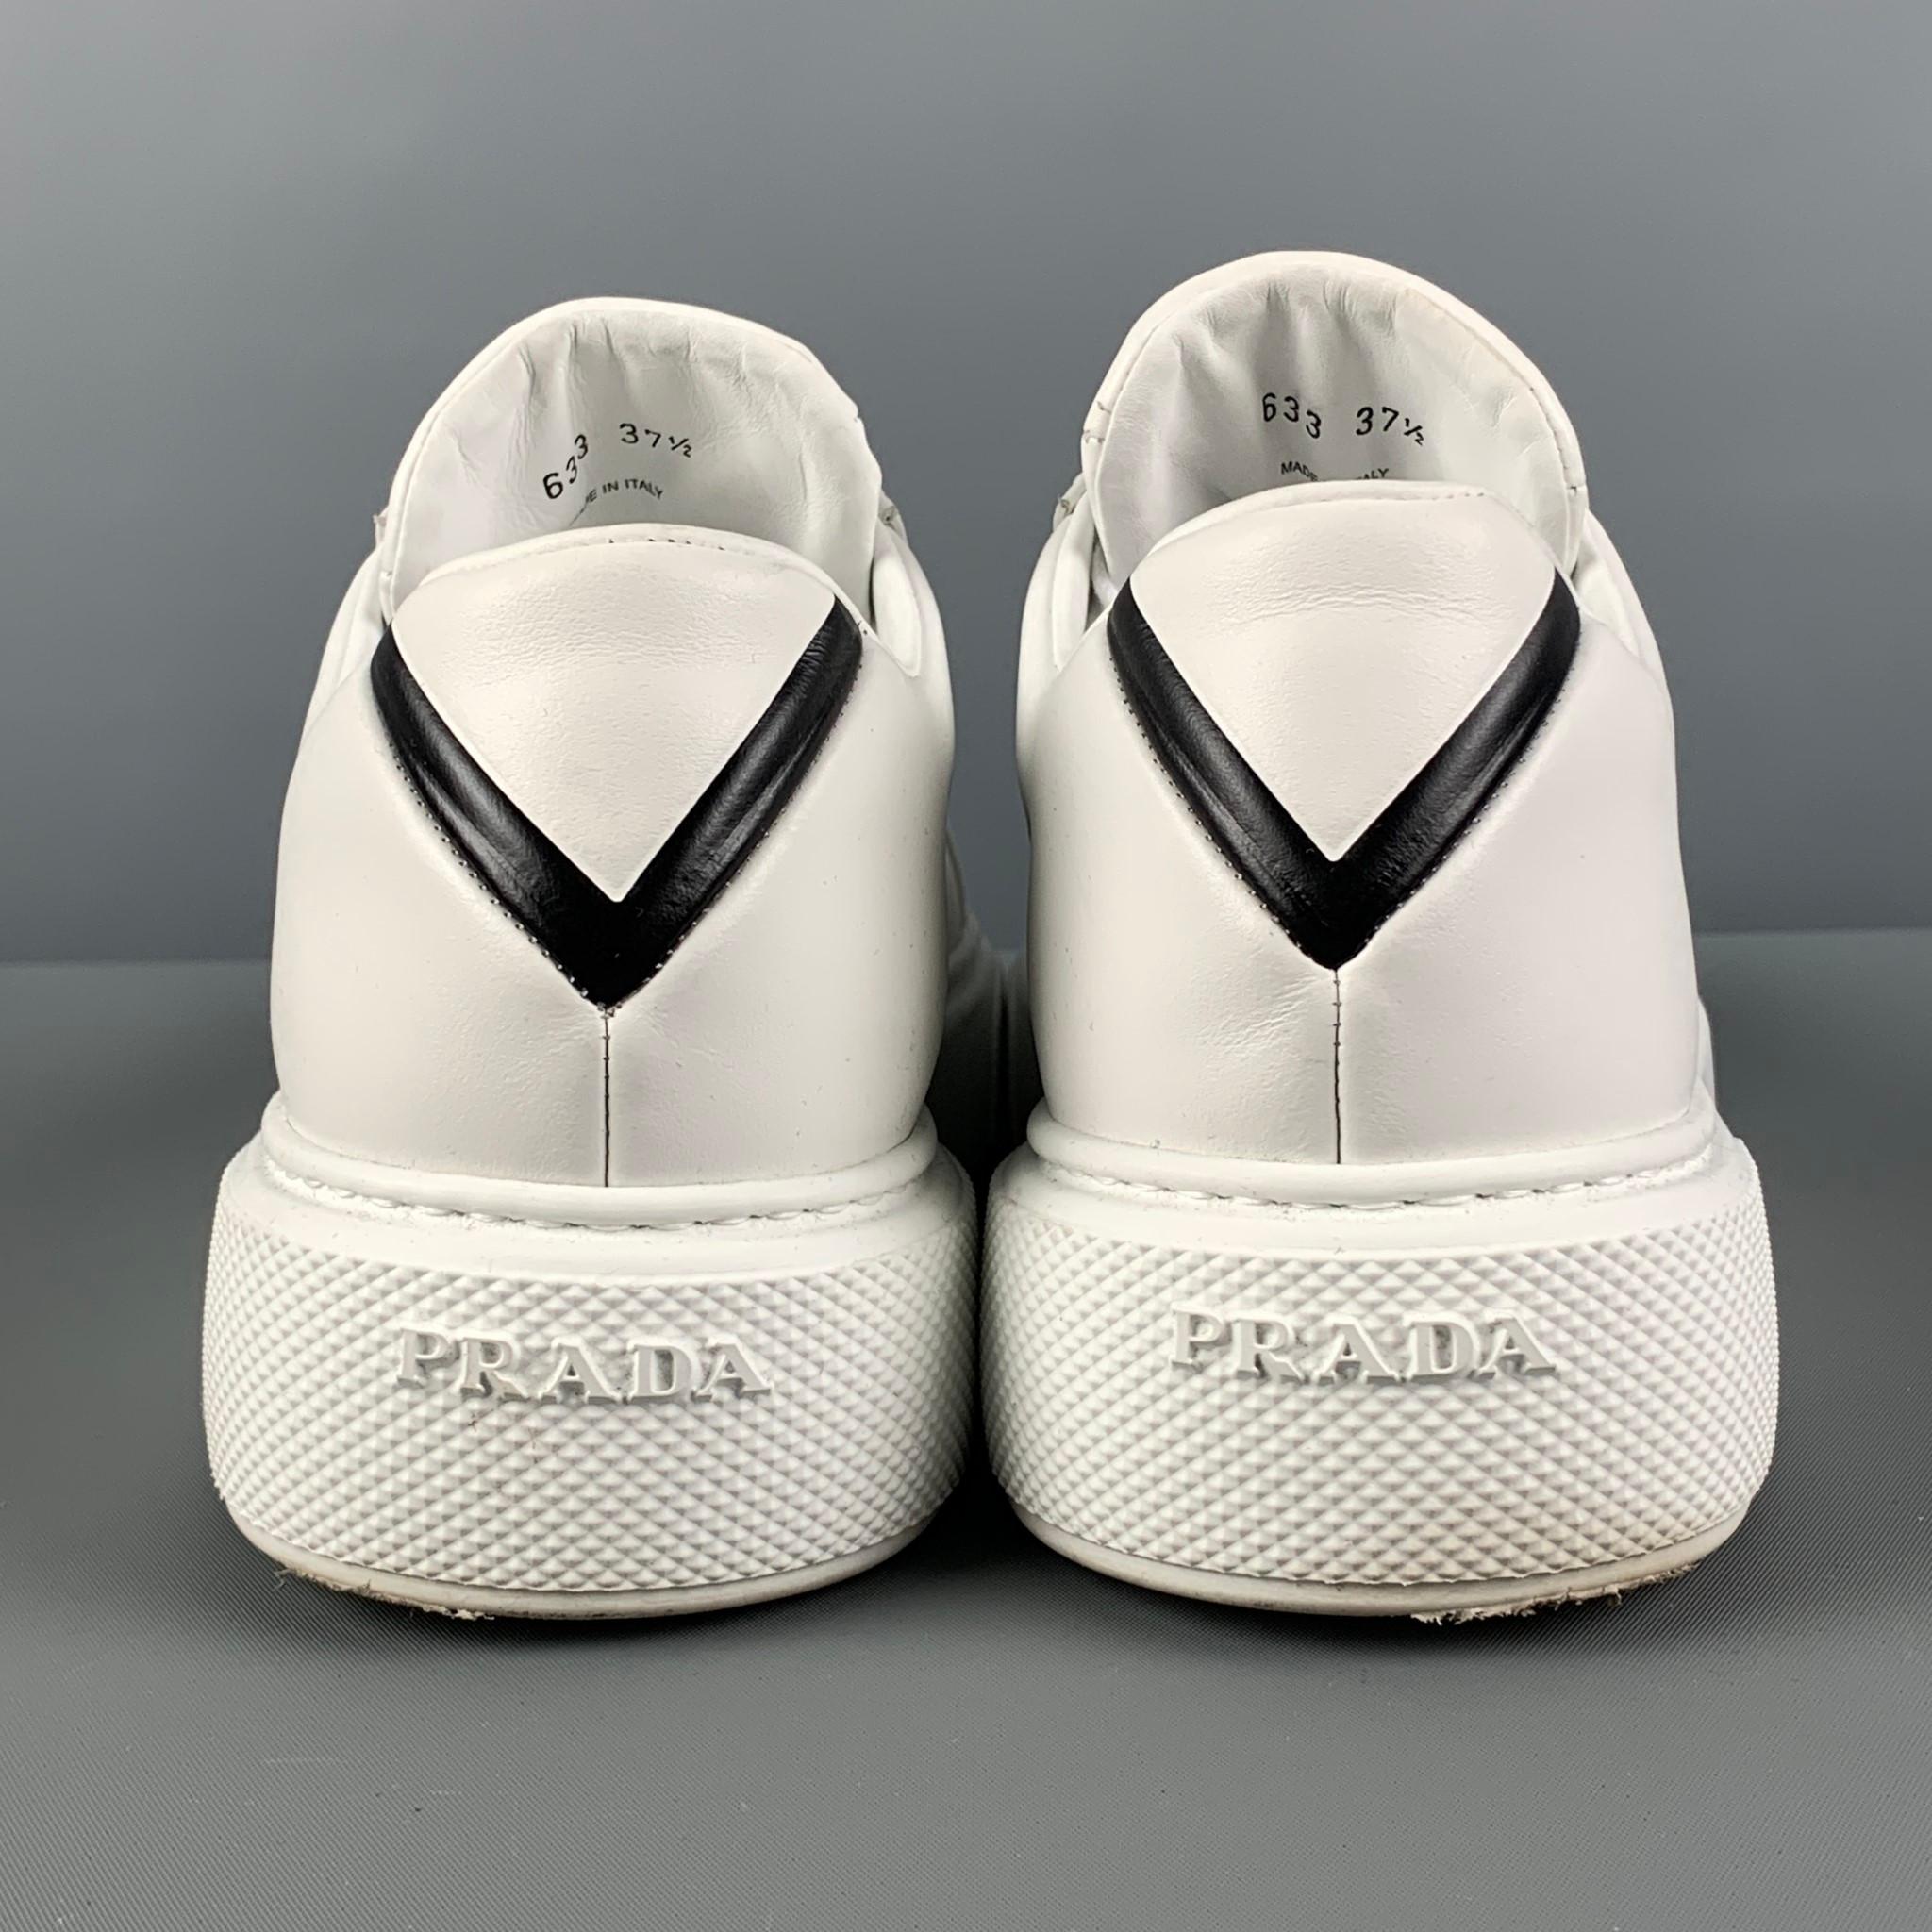 PRADA Size 7.5 White Leather Lace Up Sneakers 1